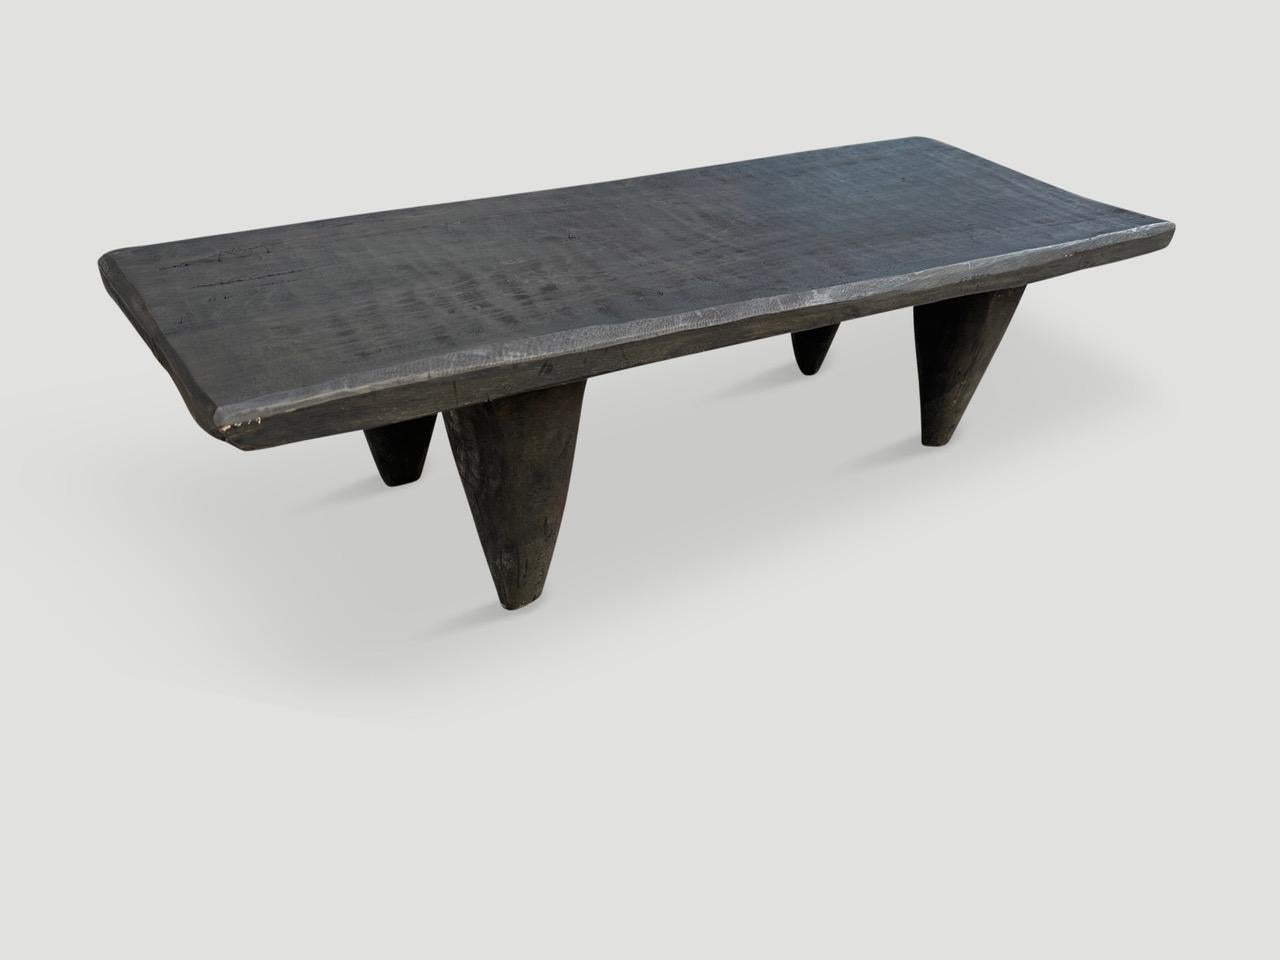 Antique coffee table or bench hand carved by the Senufo tribes from a single block of Iroko wood, native to the west coast of Africa. The wood is tough, dense and very durable. Shown with cone style legs. We stained this one espresso. We only source